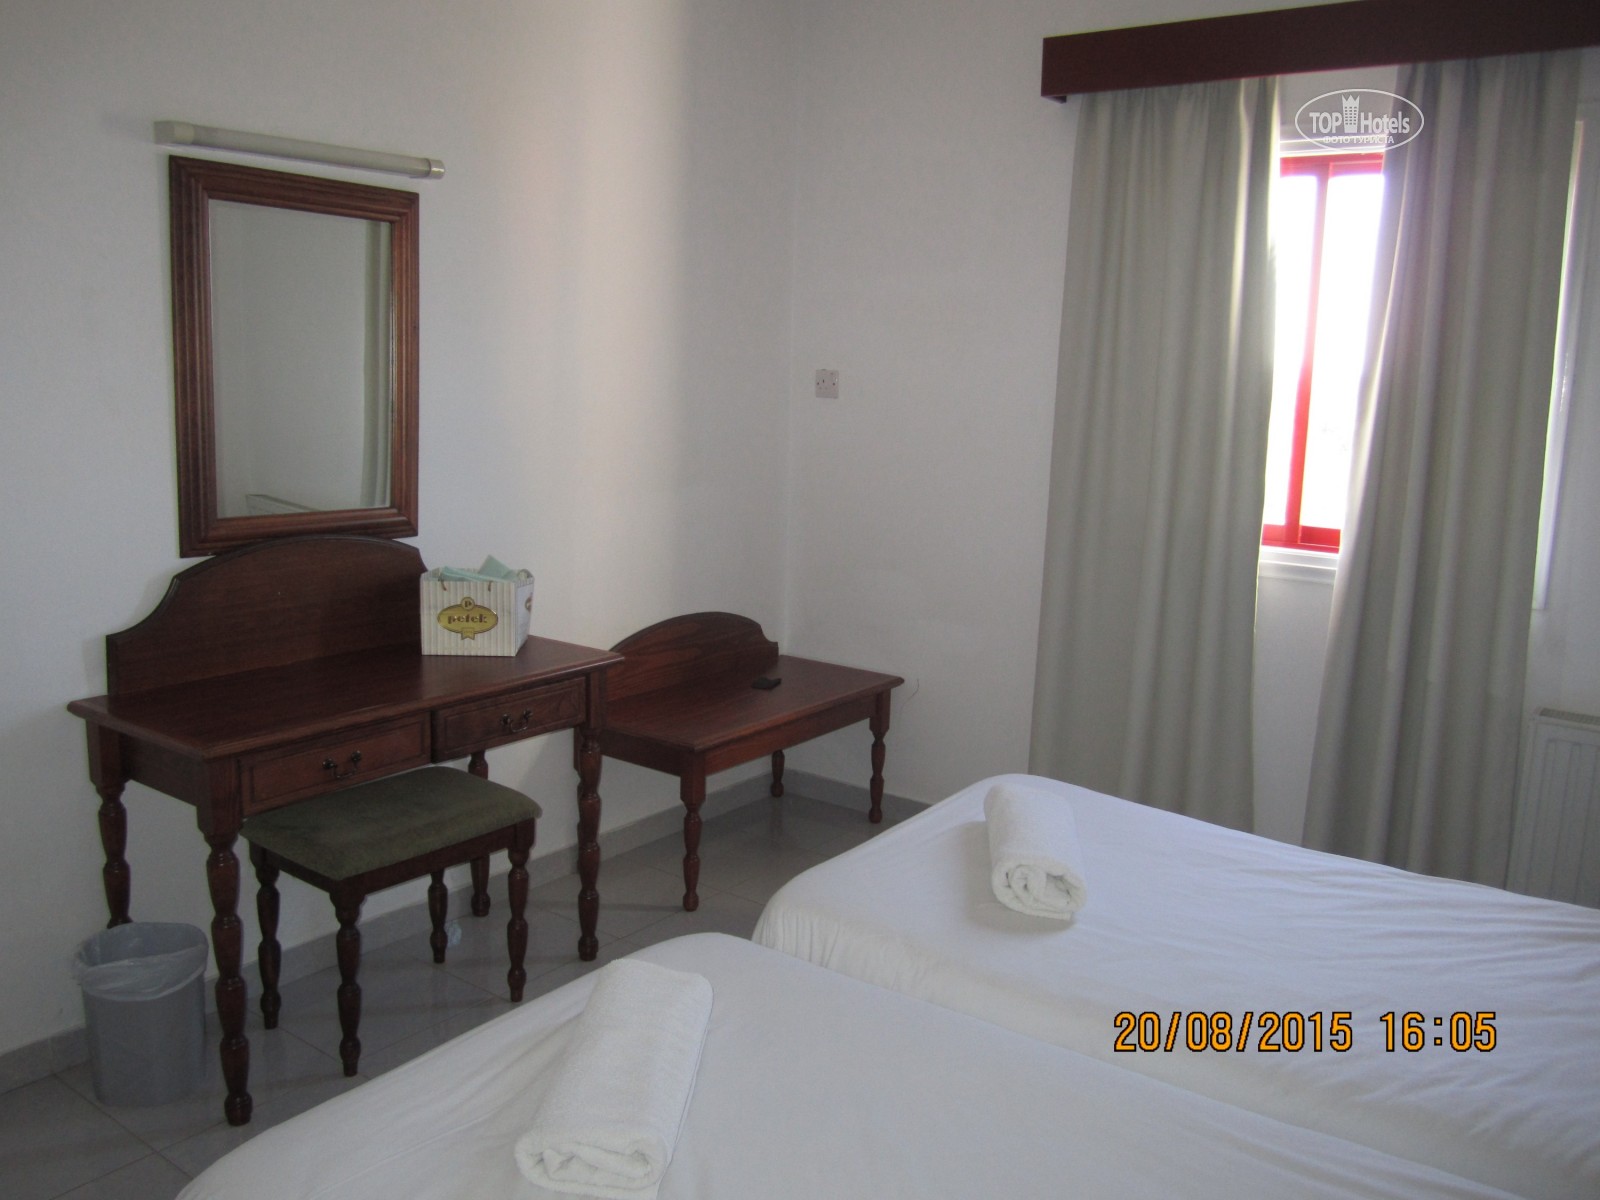 Tropical Dreams Hotel Apartments Cyprus prices